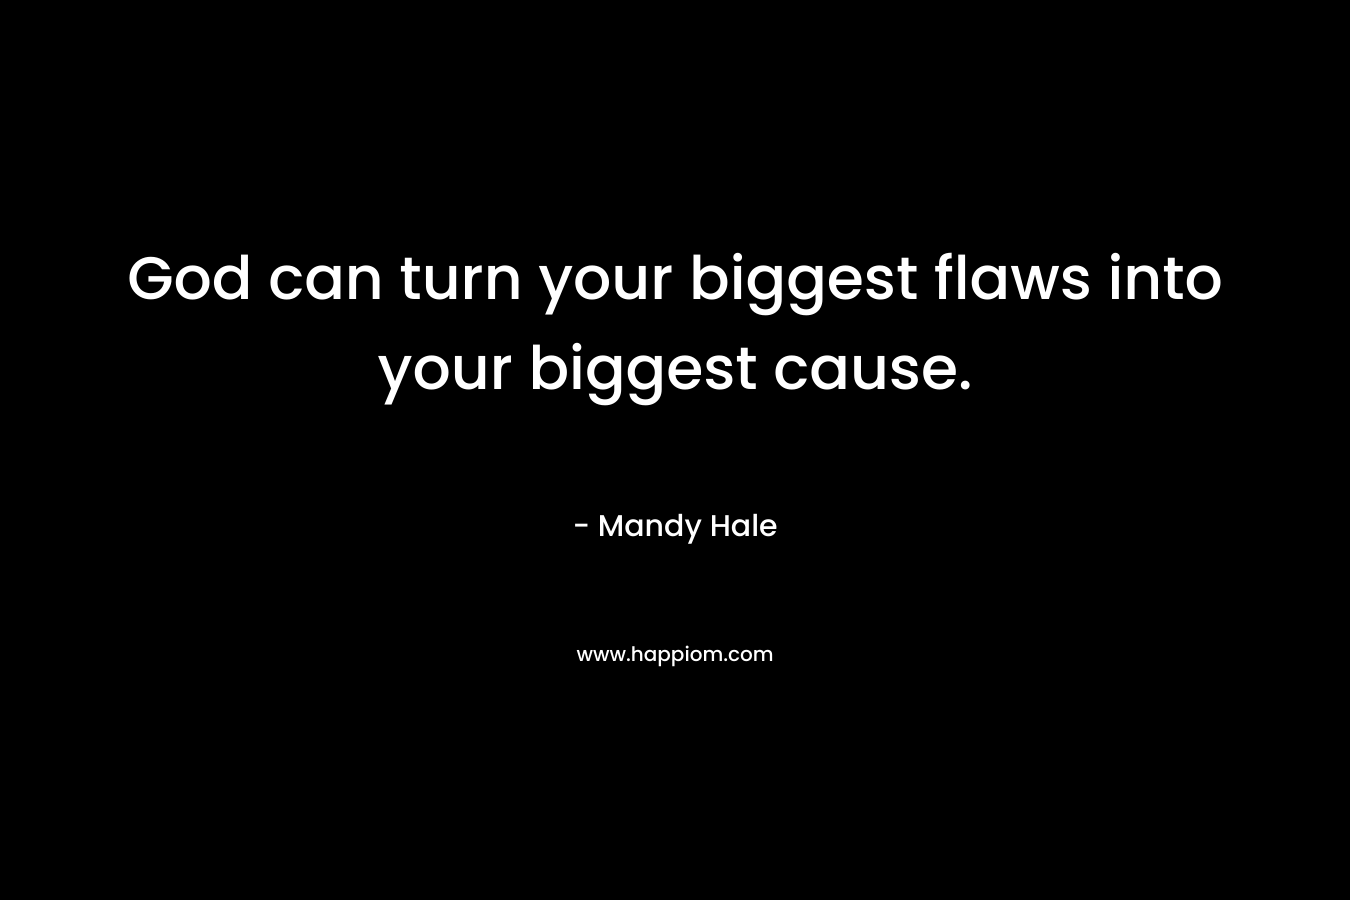 God can turn your biggest flaws into your biggest cause.